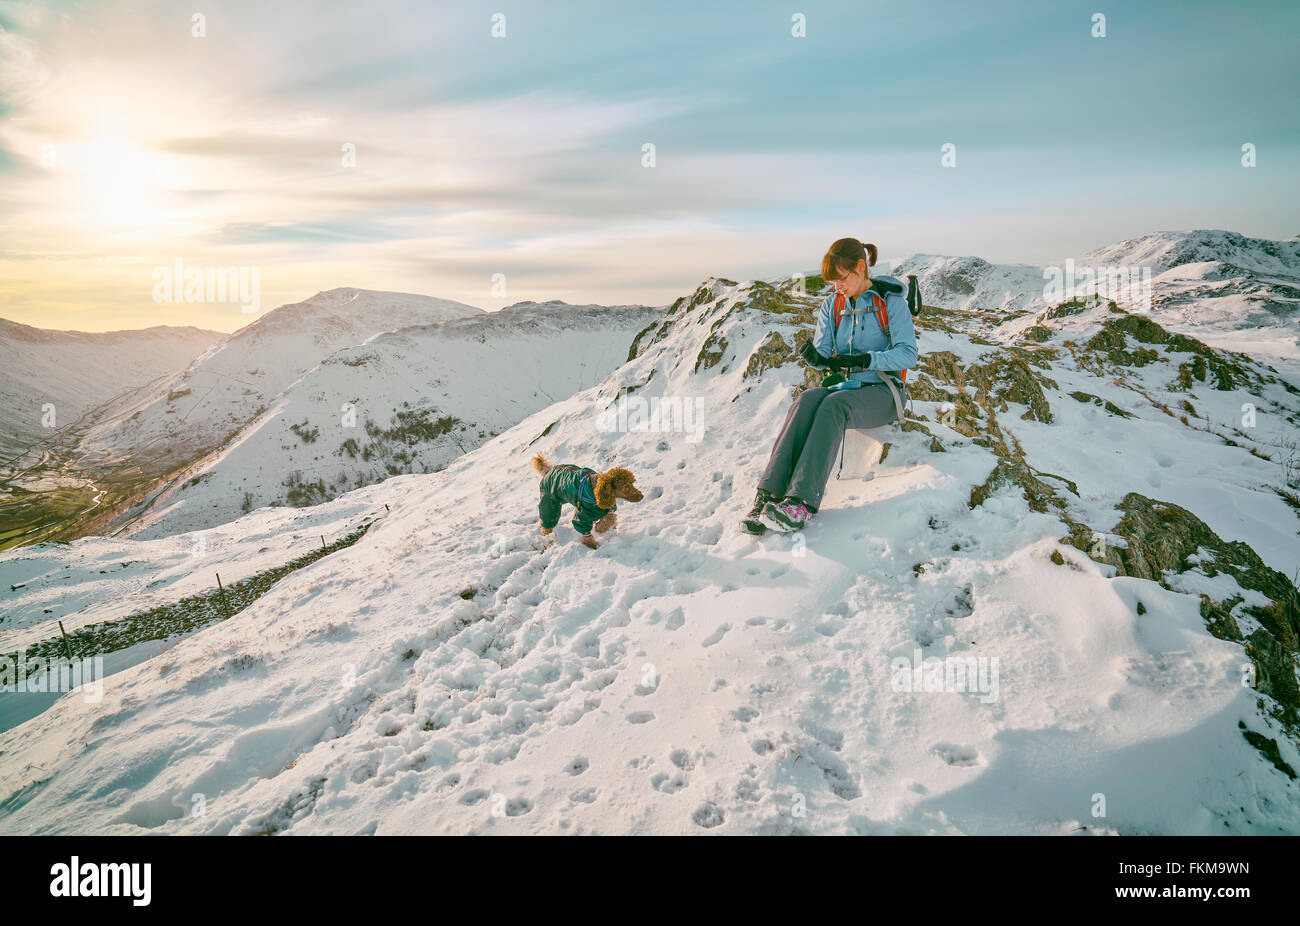 A hiker resting on the mountains tops with their dog in the UK. Grain and colour styling applied Stock Photo